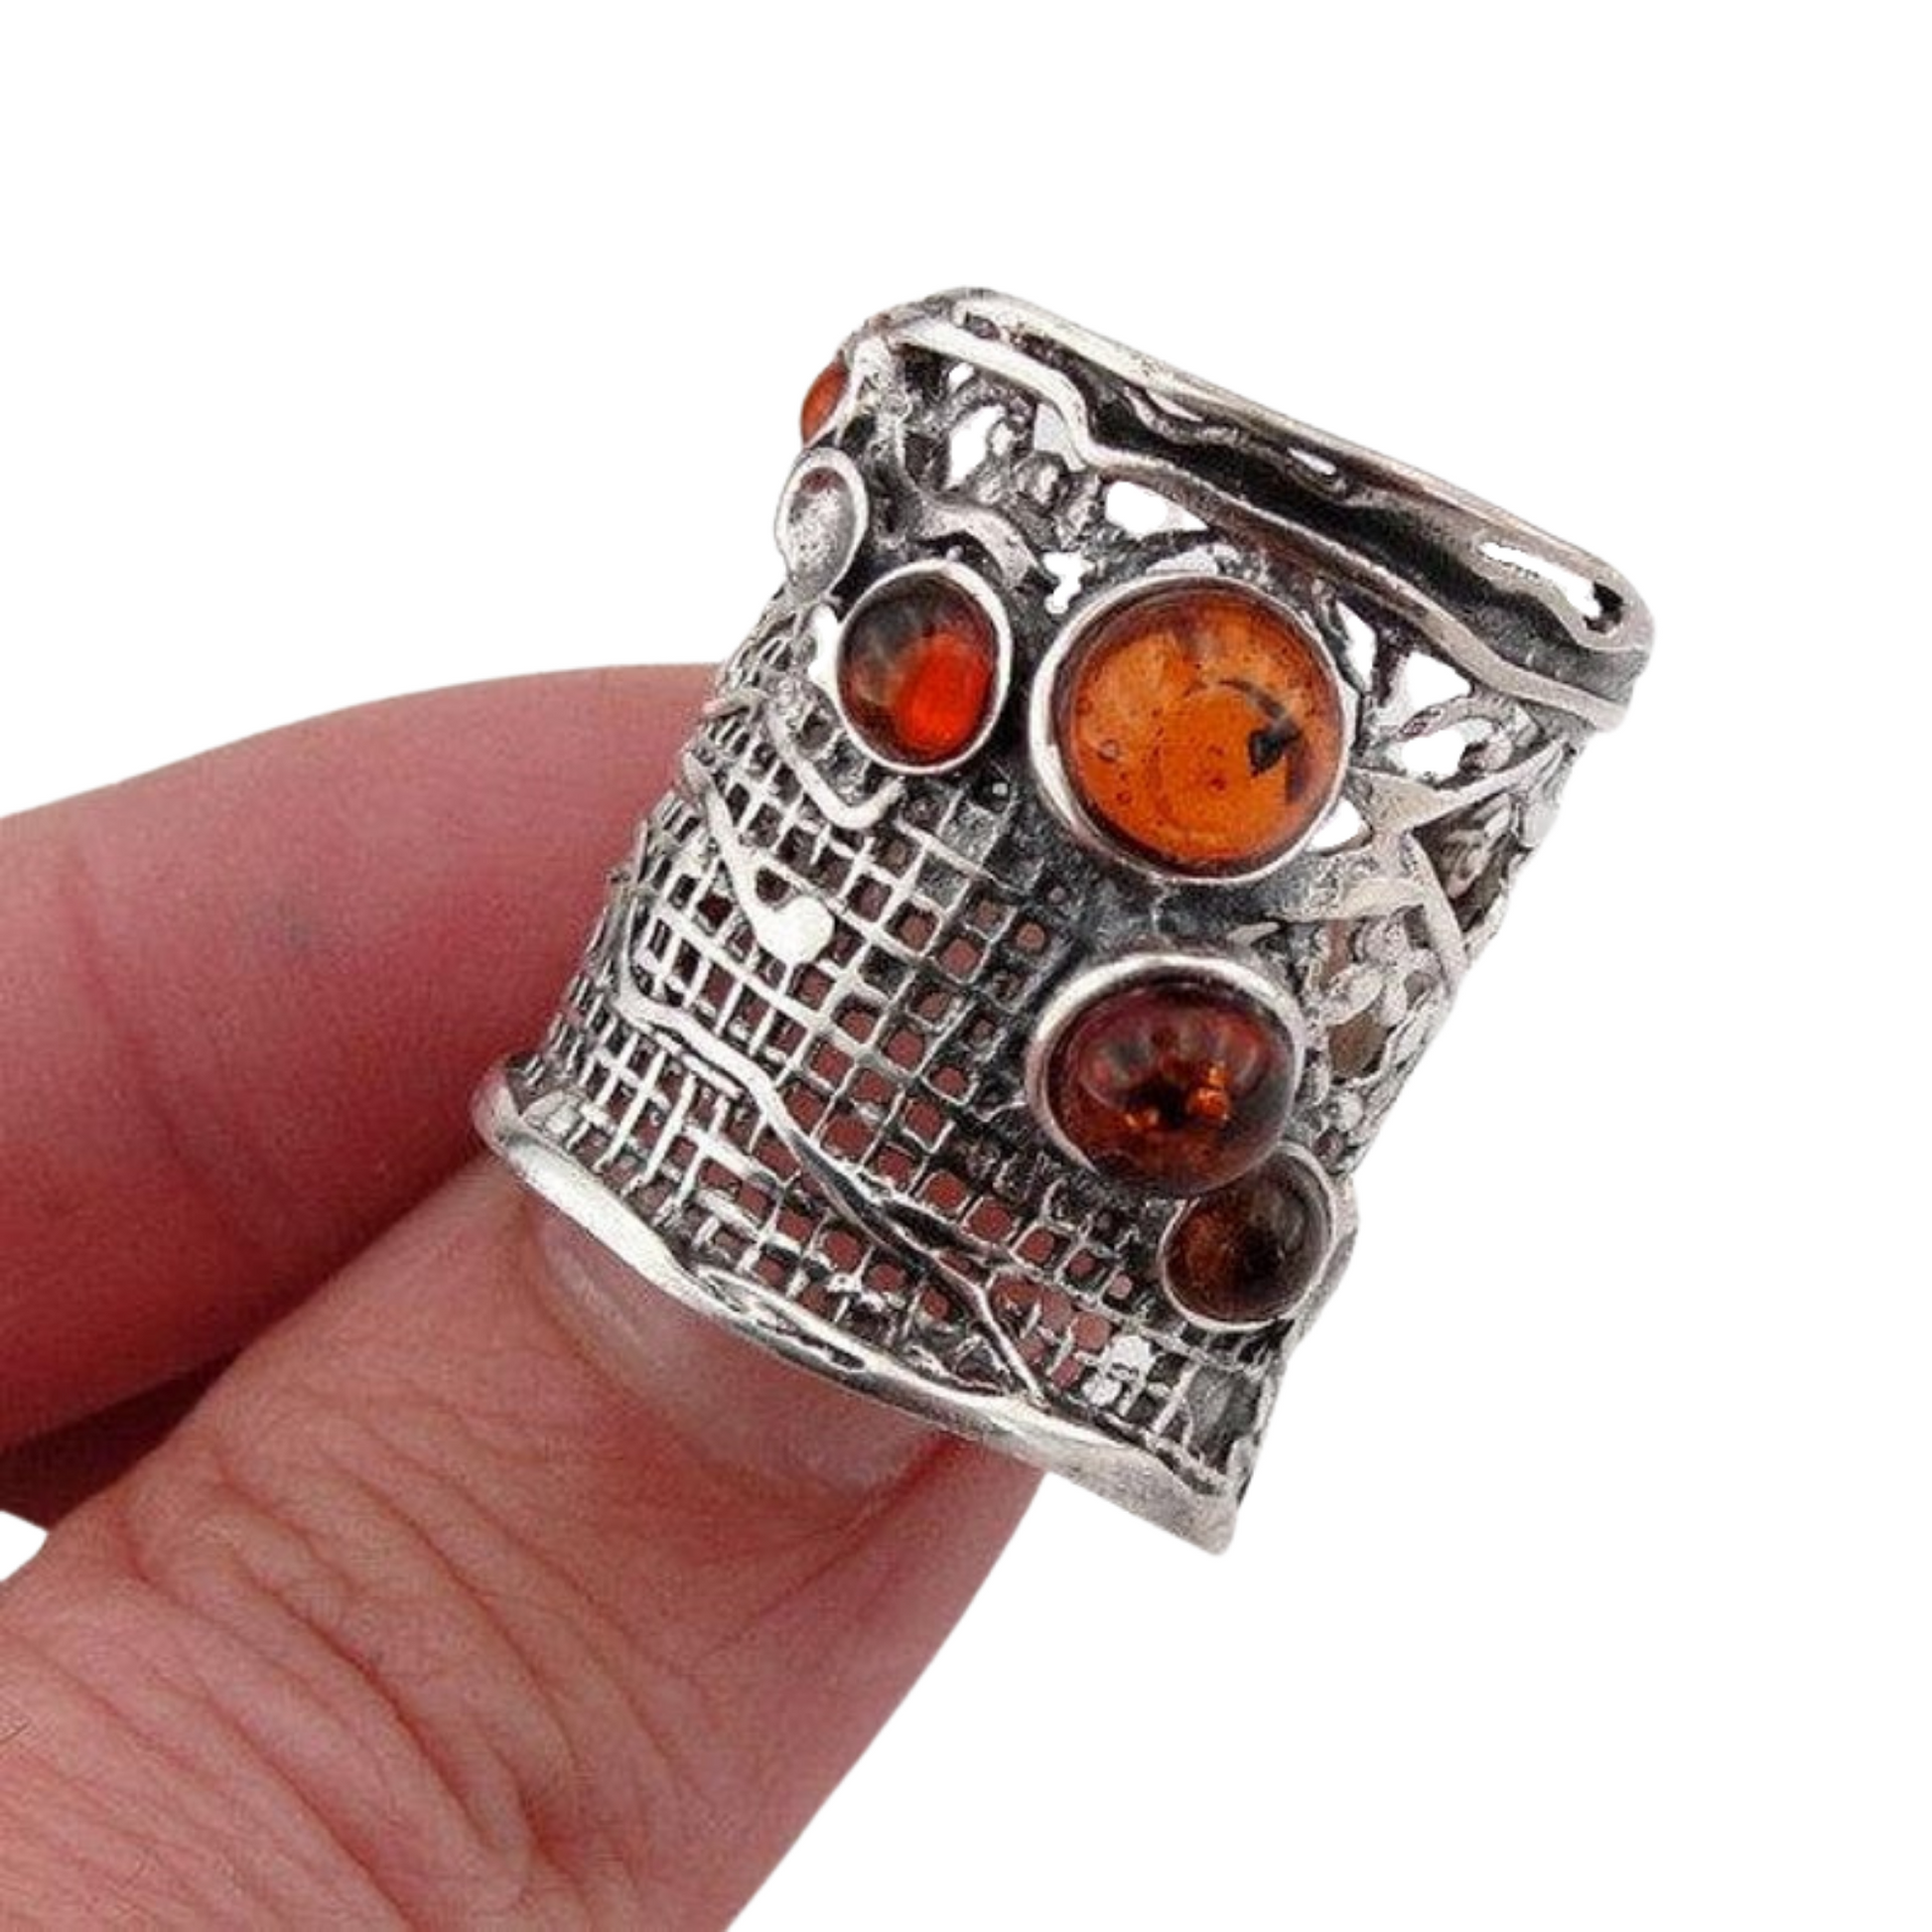 Textured sterling silver ring, wide Amber ring, wide ring, Sterling Silver Ring, Unisex ring, Honey amber ring, men ring, Made in Israel, wide ring, statement ring, Amber ring, gift for her, gift for him, Israeli Jewelry, Israeli design, men ring,